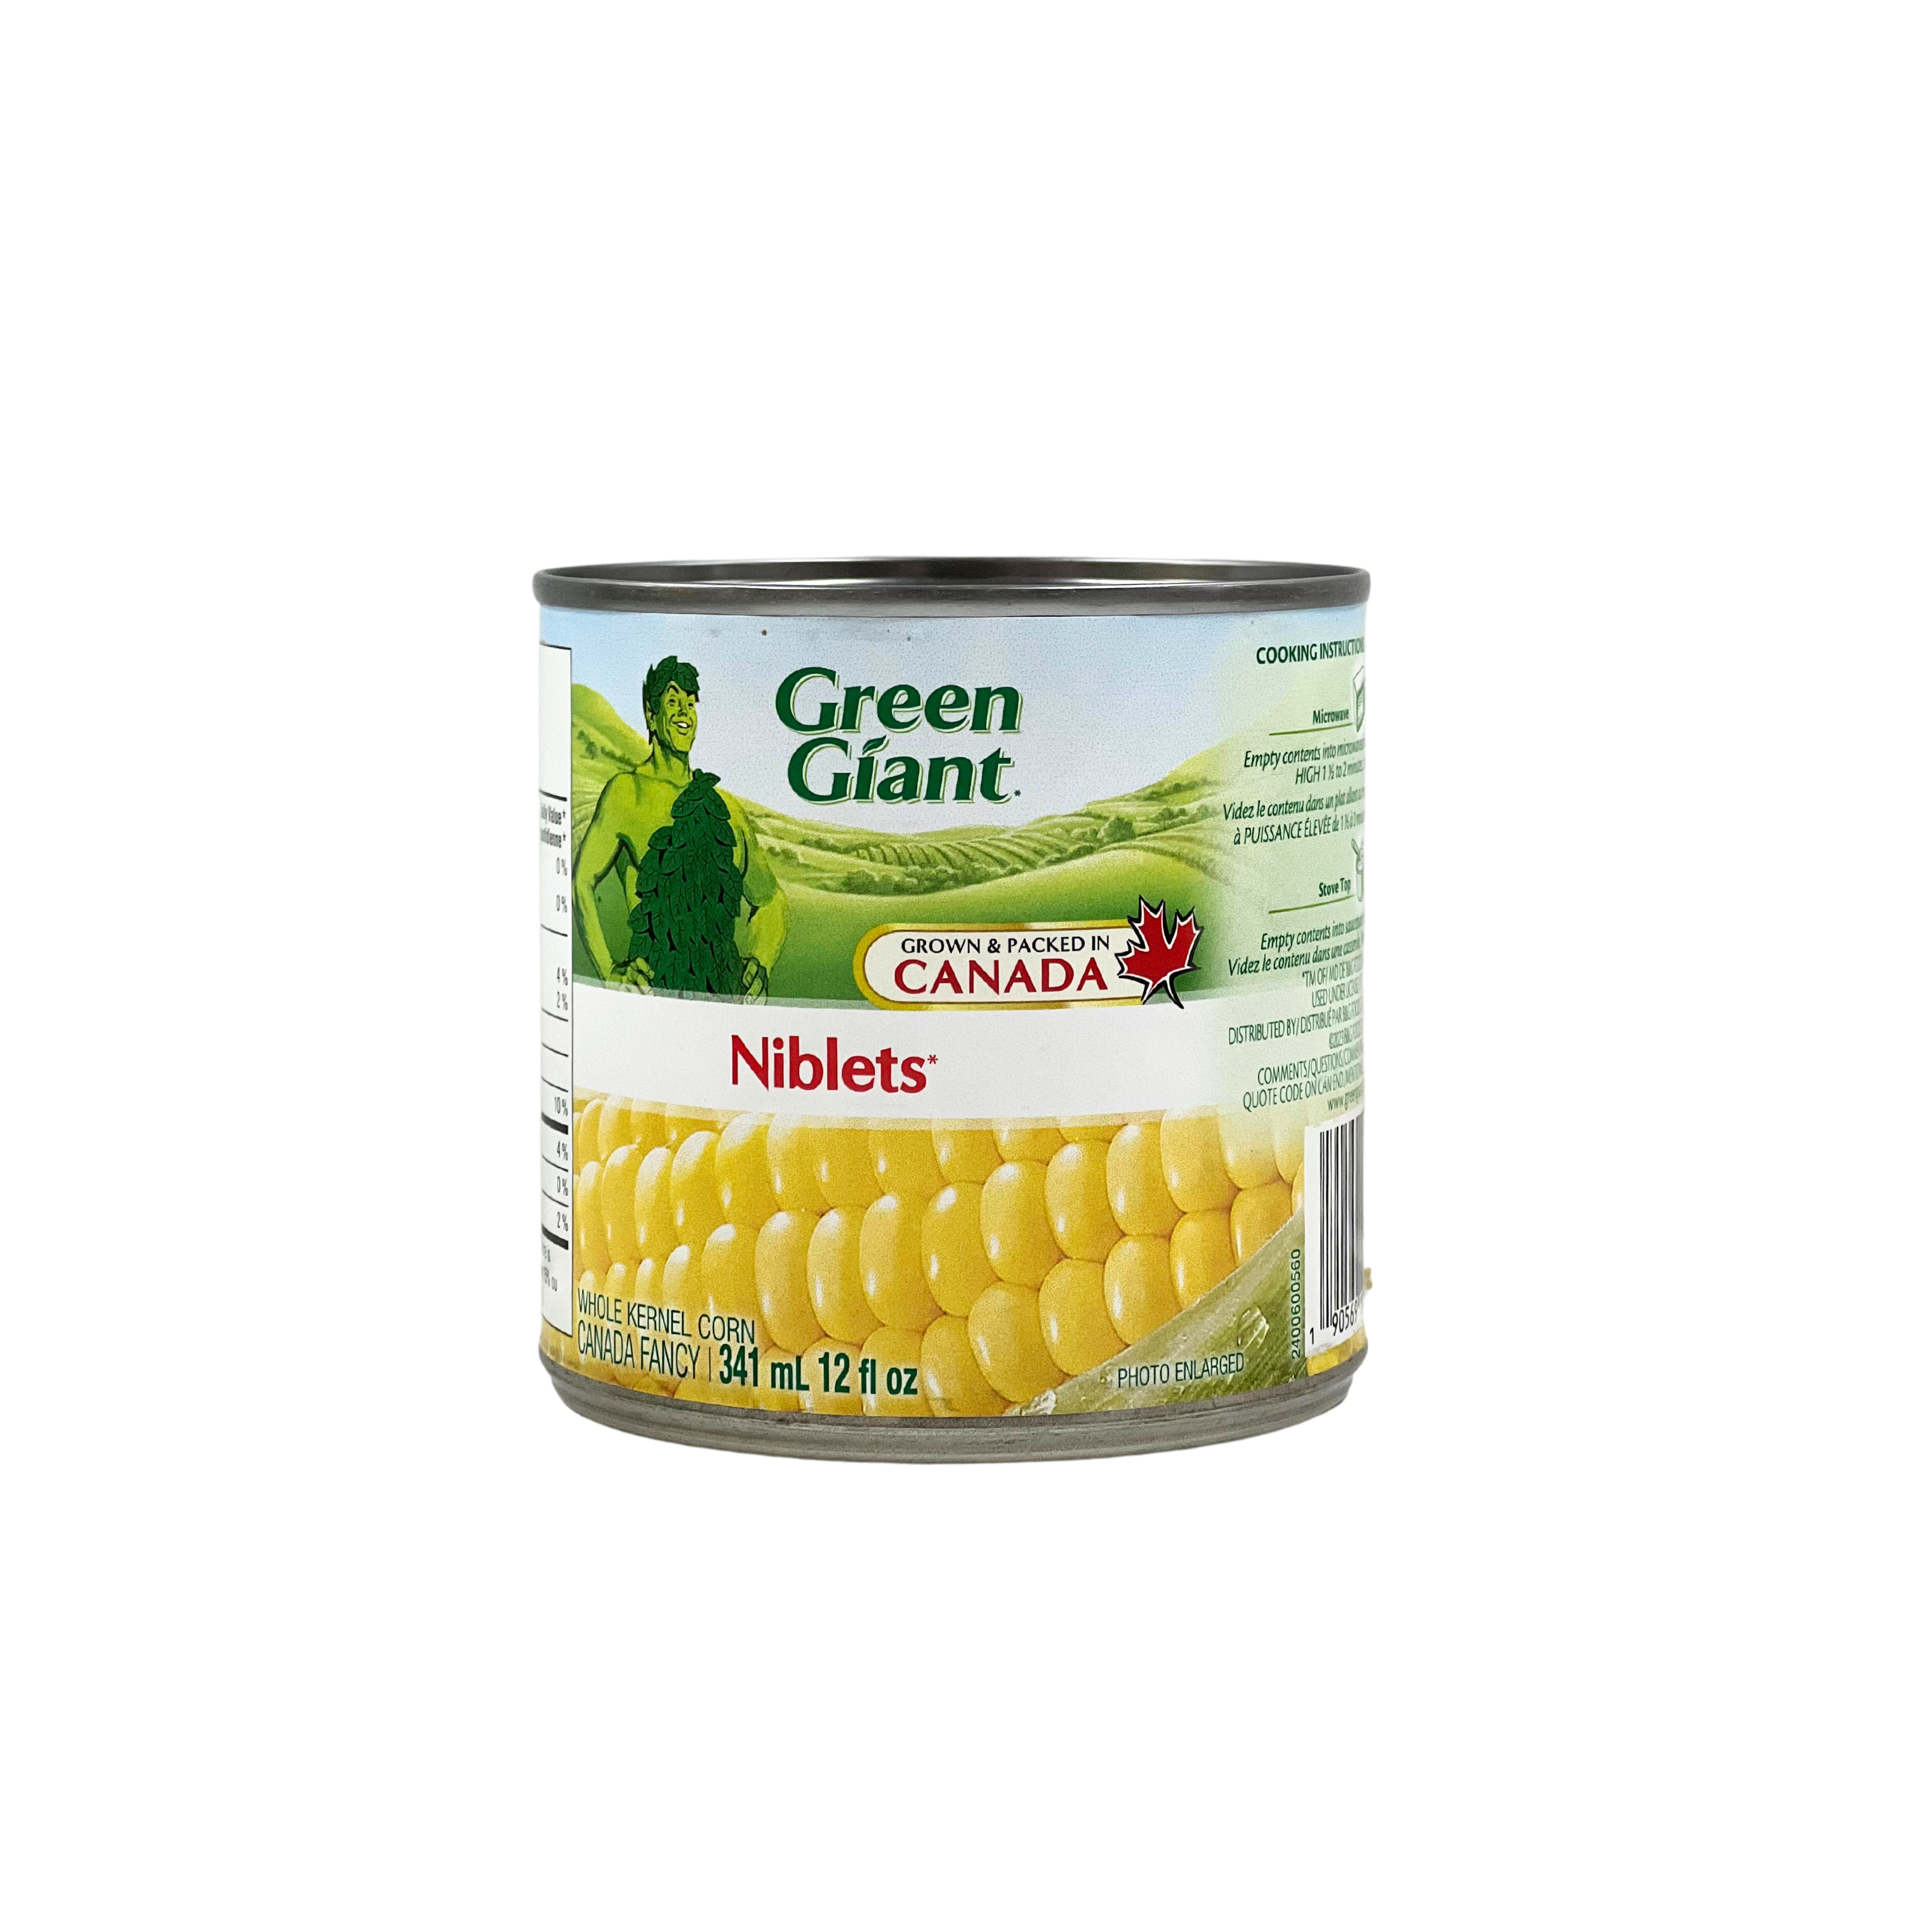 Green Giant Niblets 341 ml